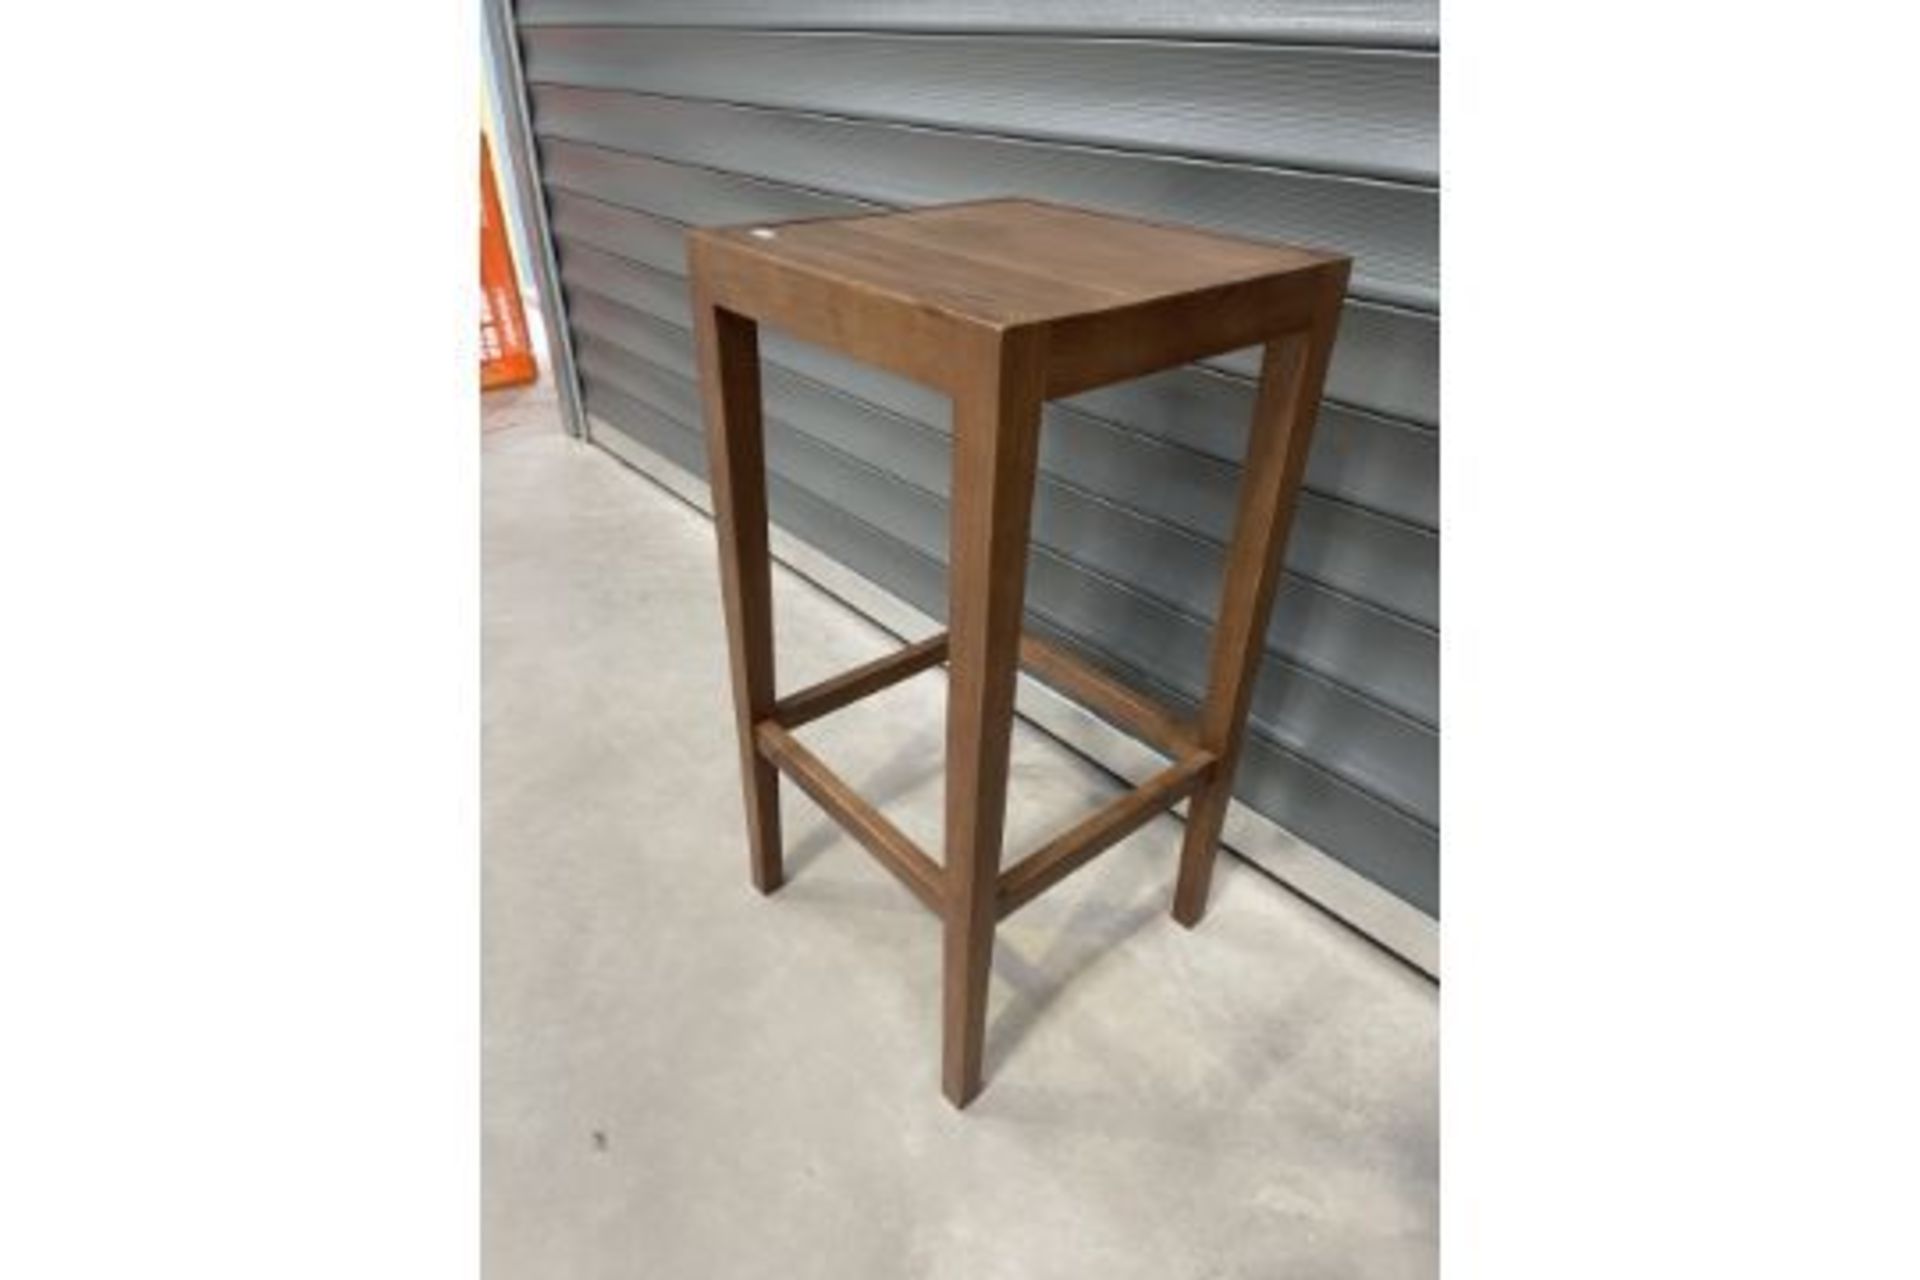 NEW SOLID WOOD BAR STOOL - Image 2 of 2